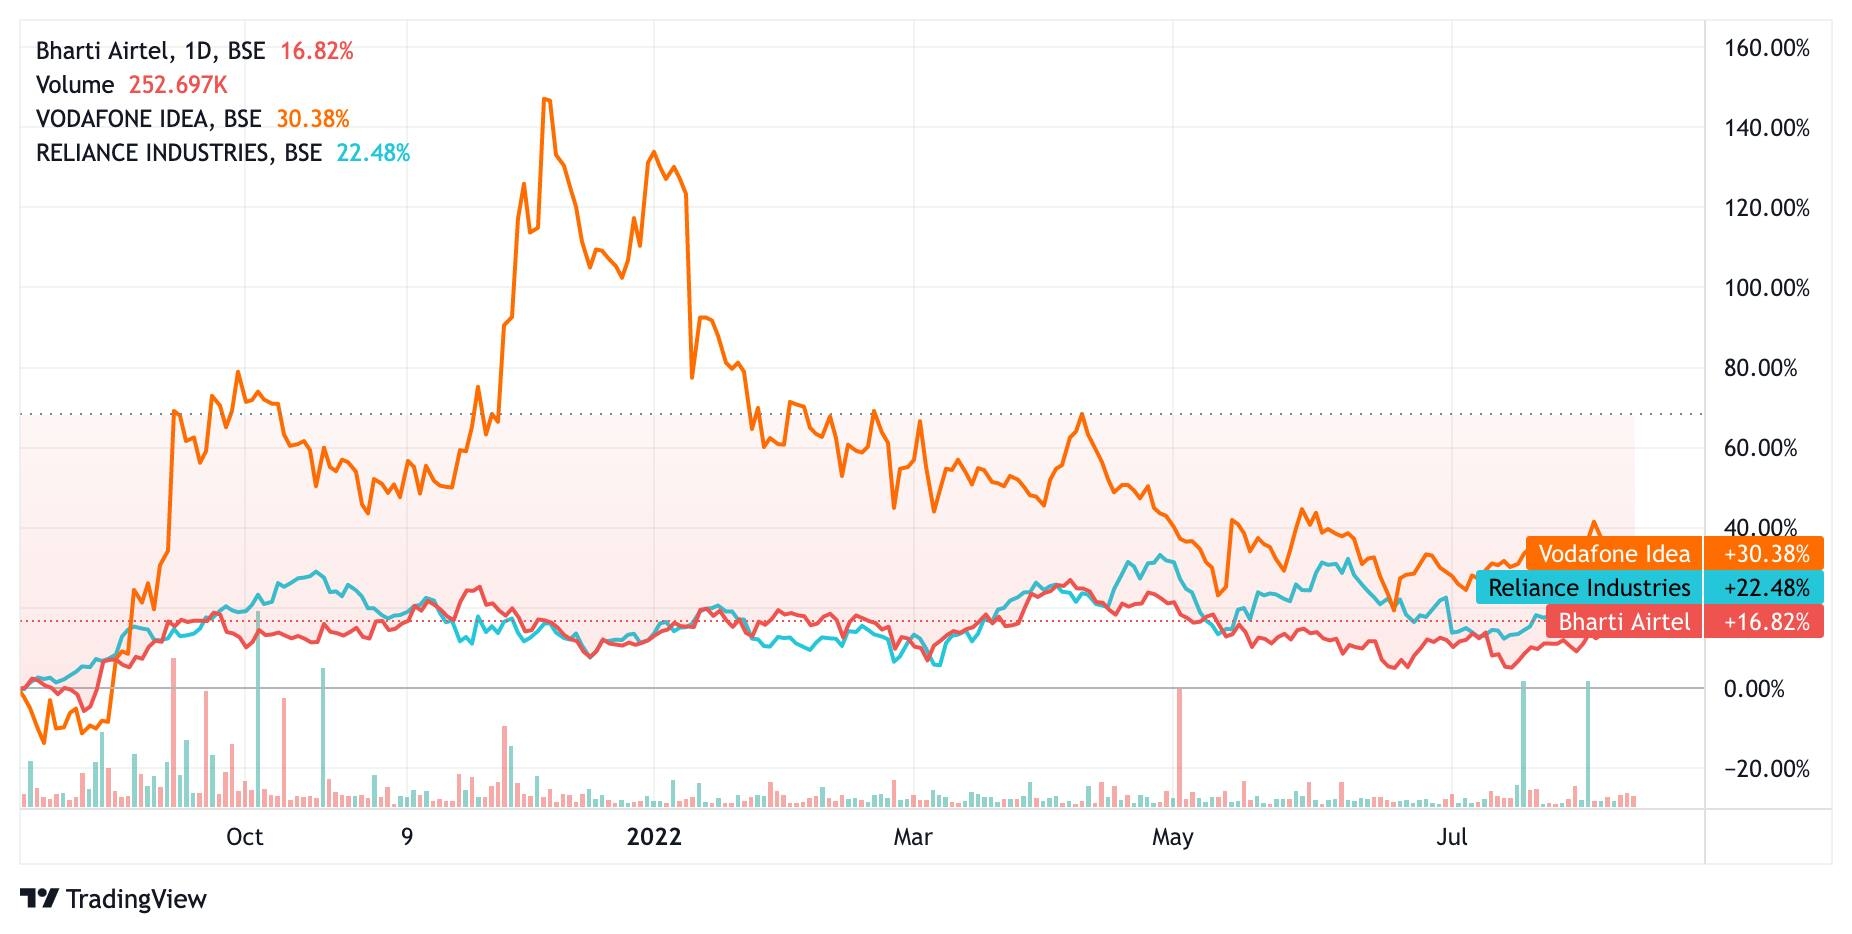 Telecom price chart of Airtel, Vodafone Idea and Reliance Industries.&nbsp;